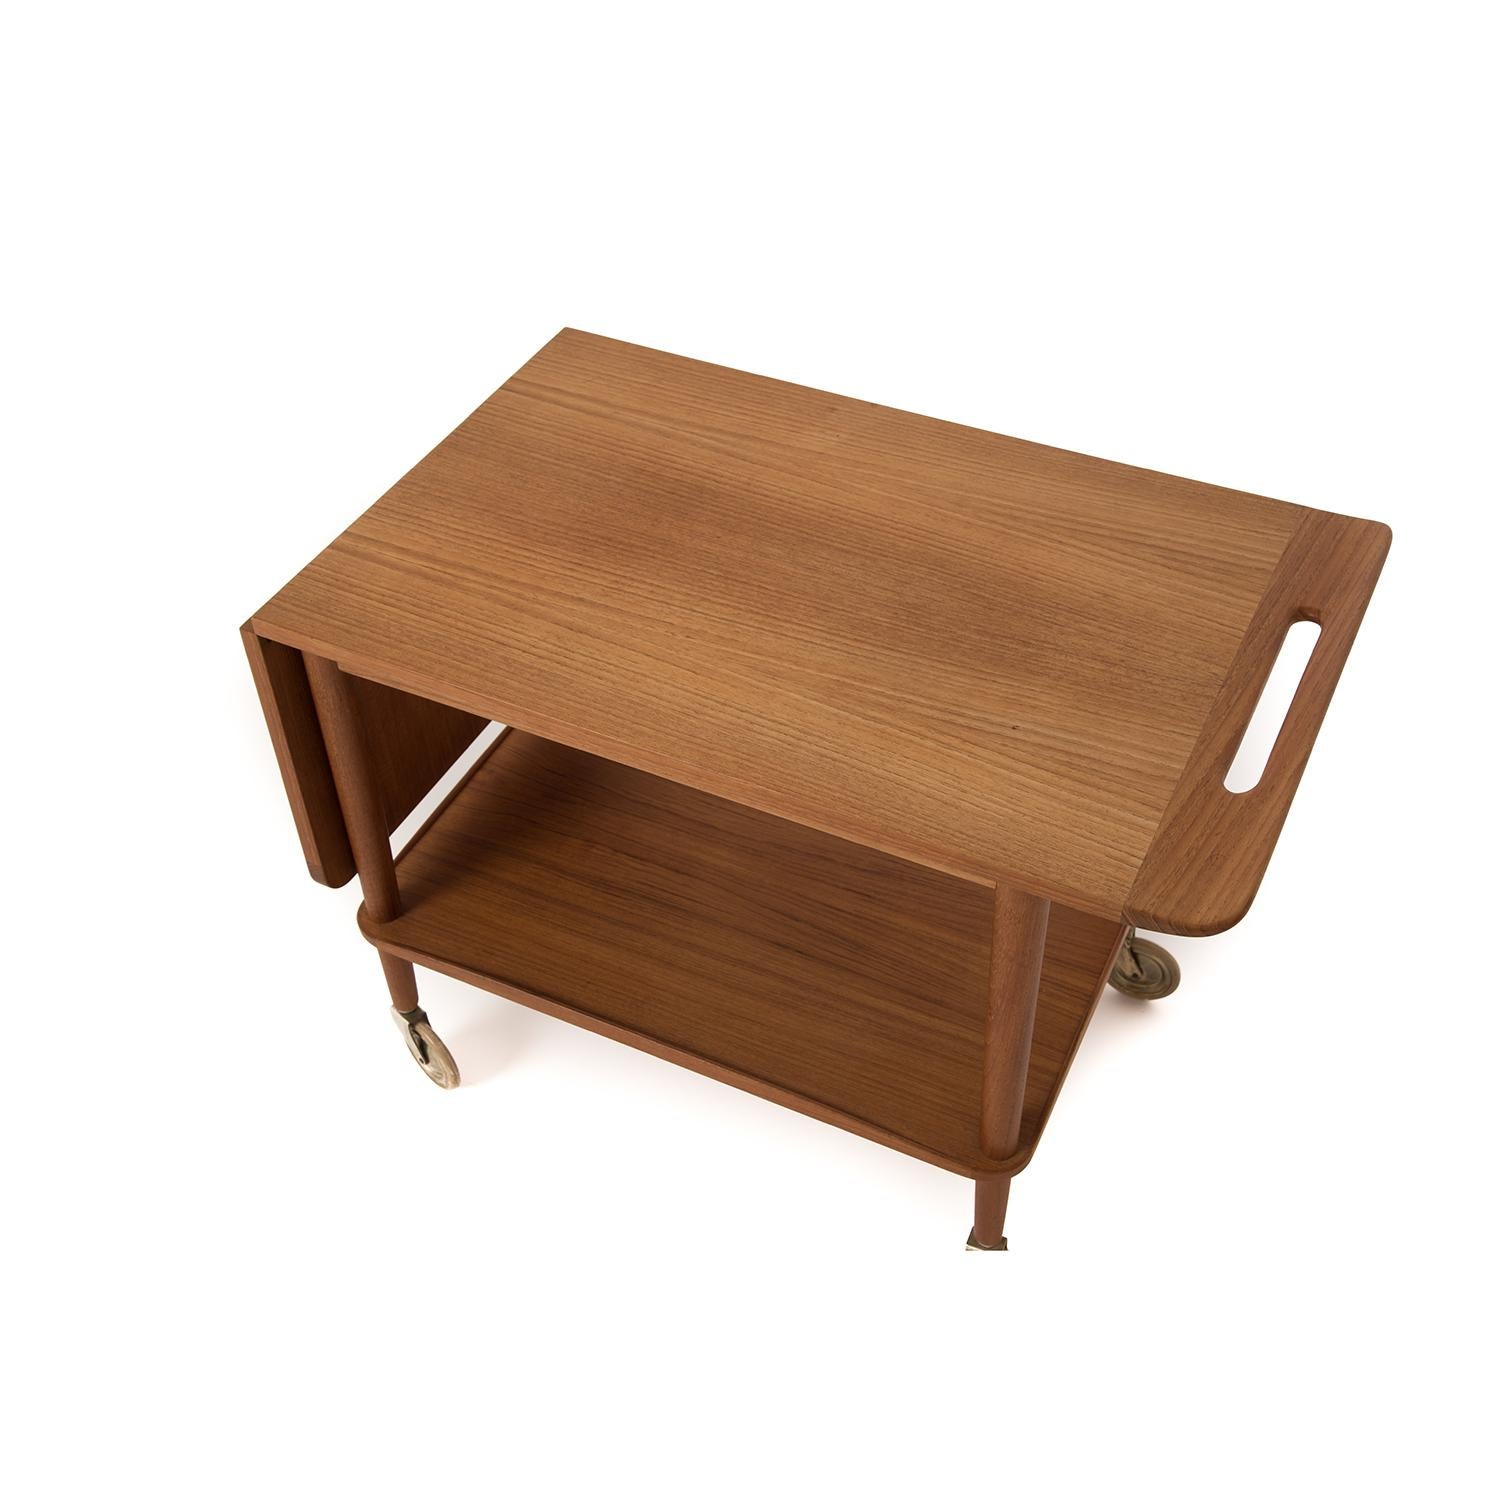 This original Danish modern serving cart is made from old growth teak, traditionally finished with oil. The top of this cart slides to the right to increase serving surface, the sculpted handhold makes the move convenient. Lower teak shelf provides